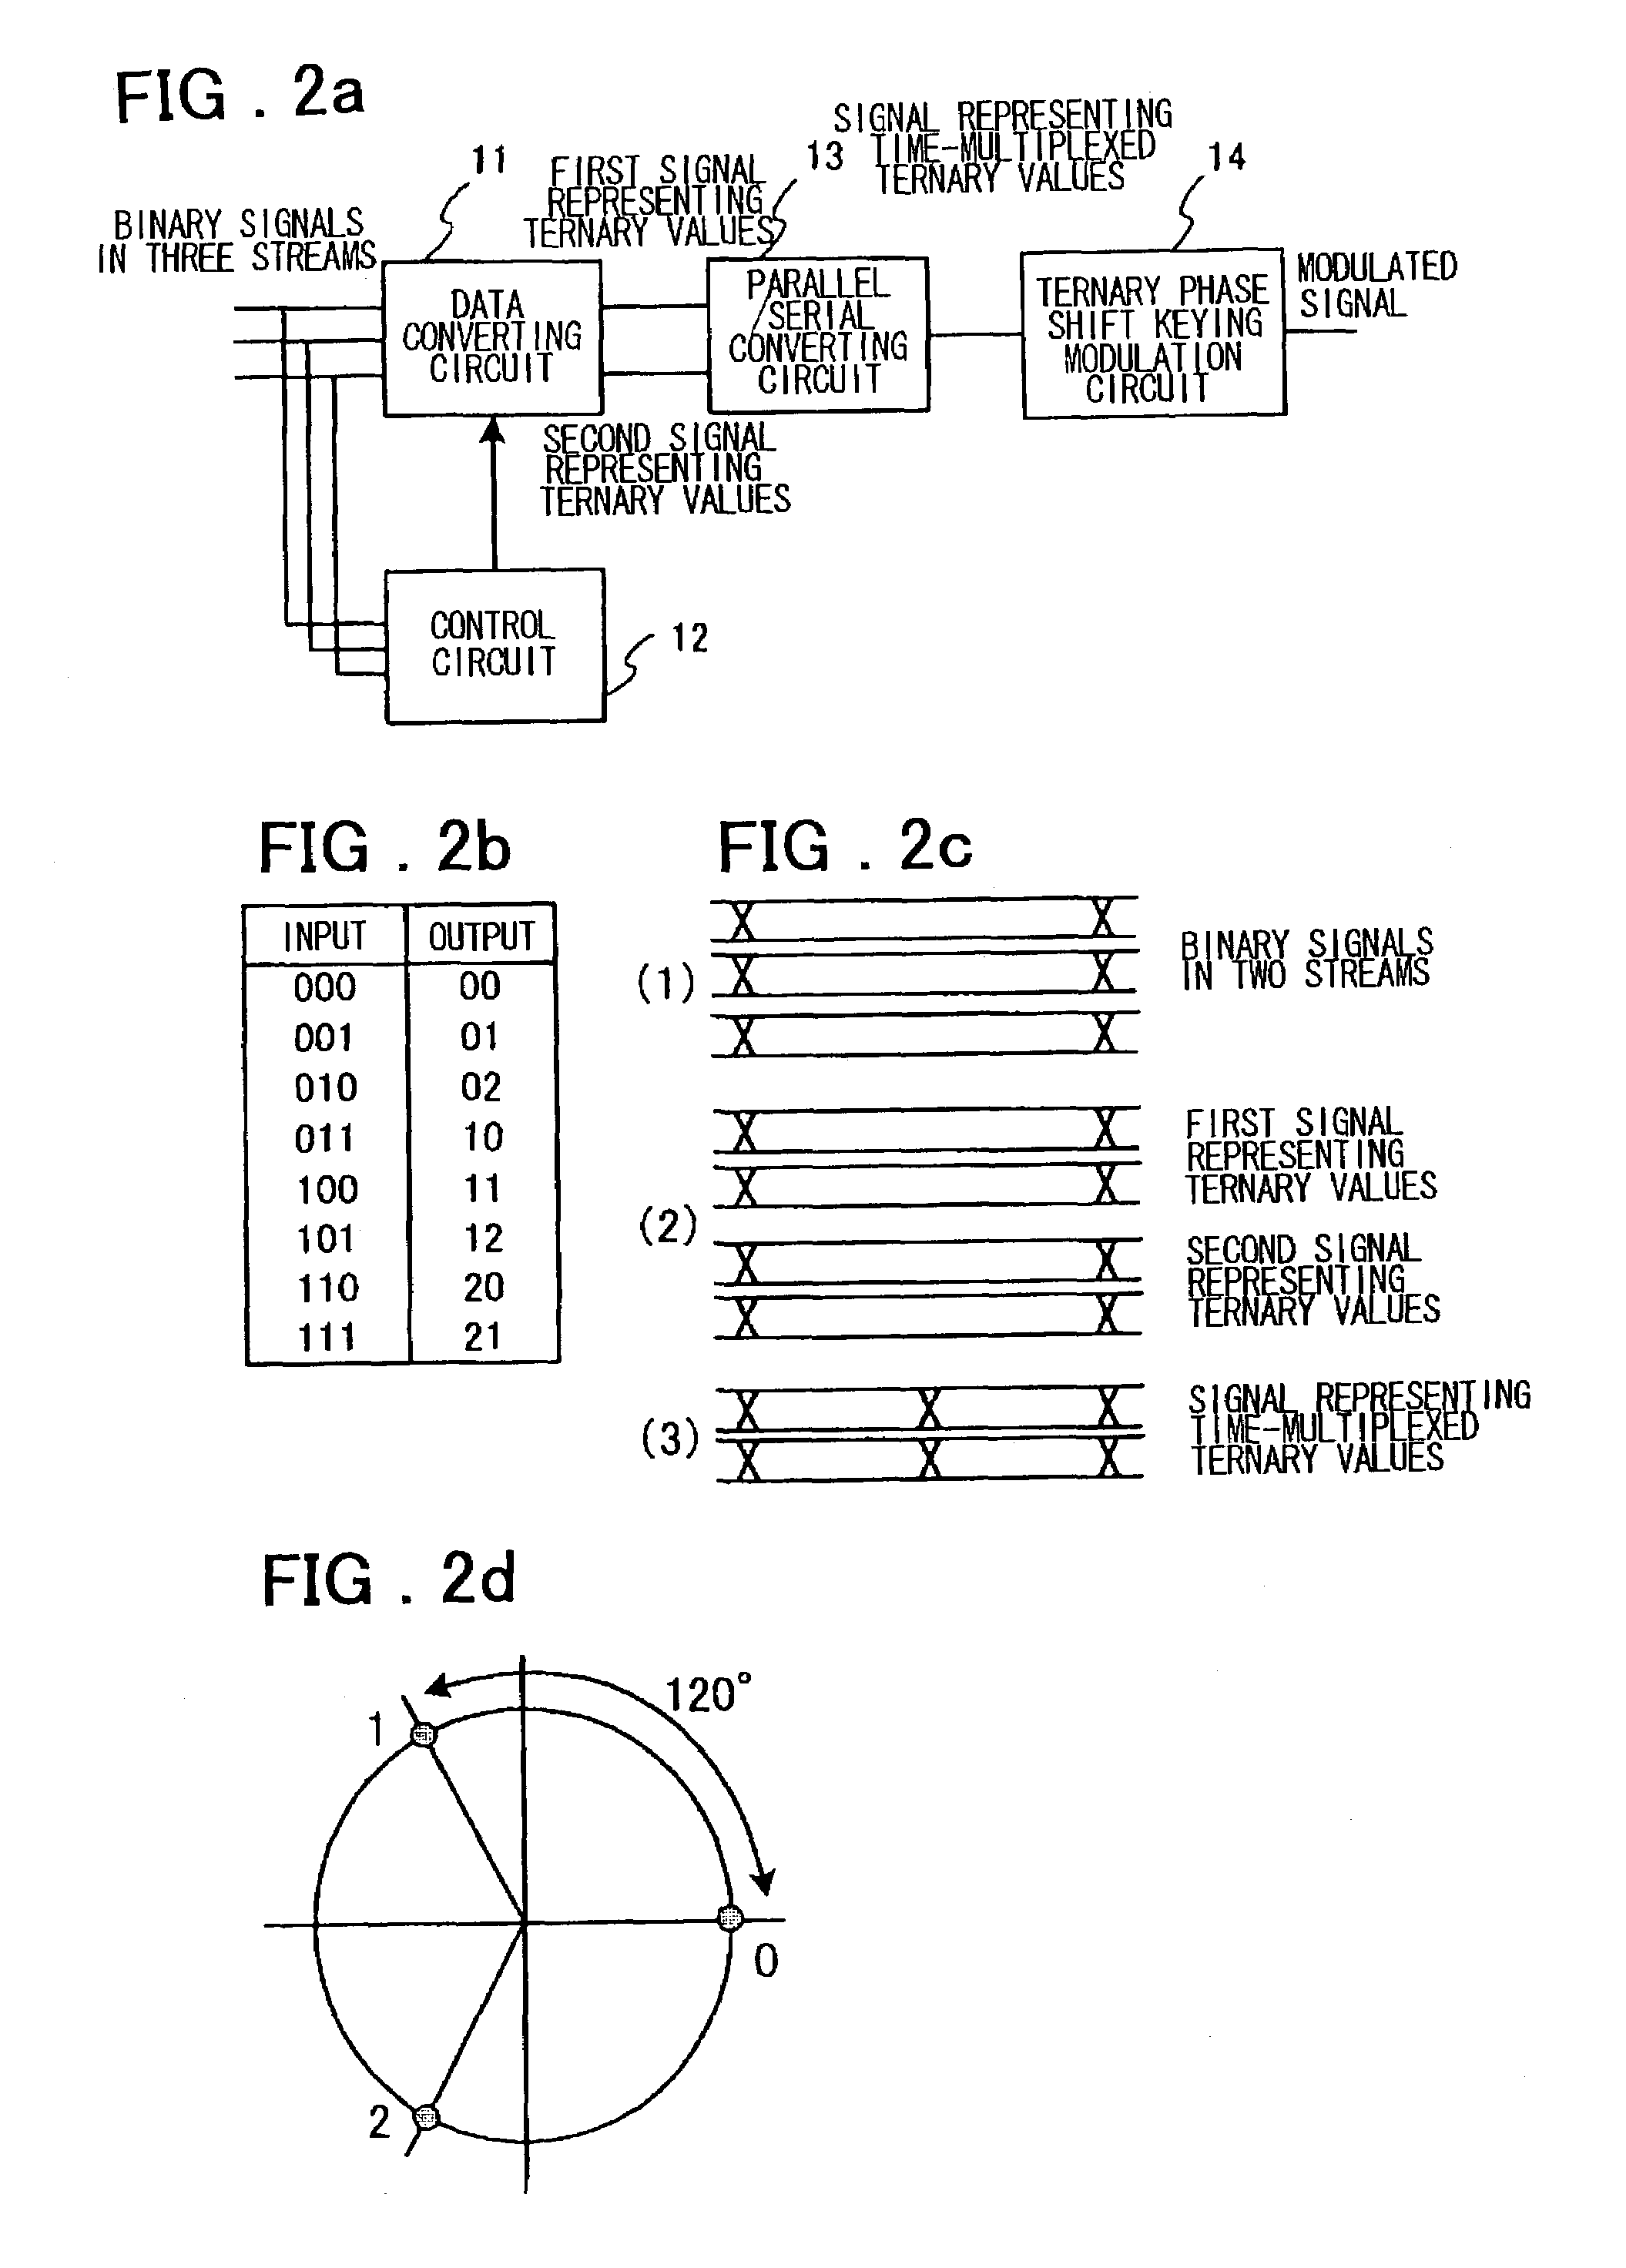 Code division multiple access communication system and method